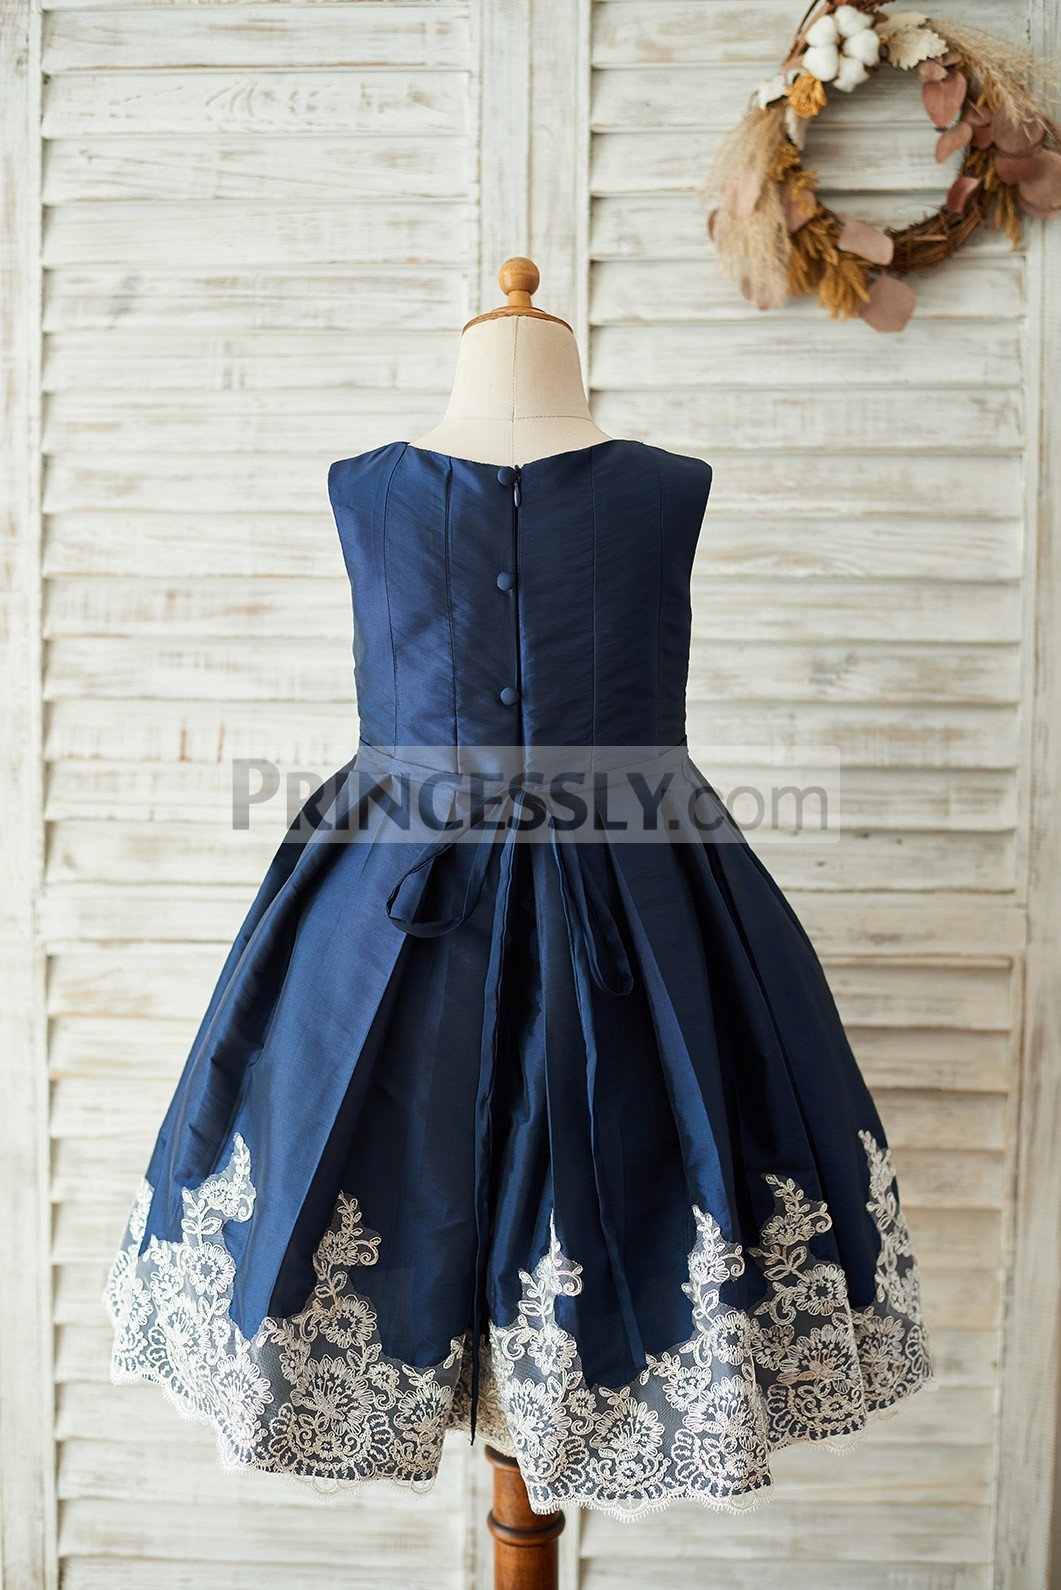 Fitted bodice pleated skirt navy blue wedding baby girl dress 